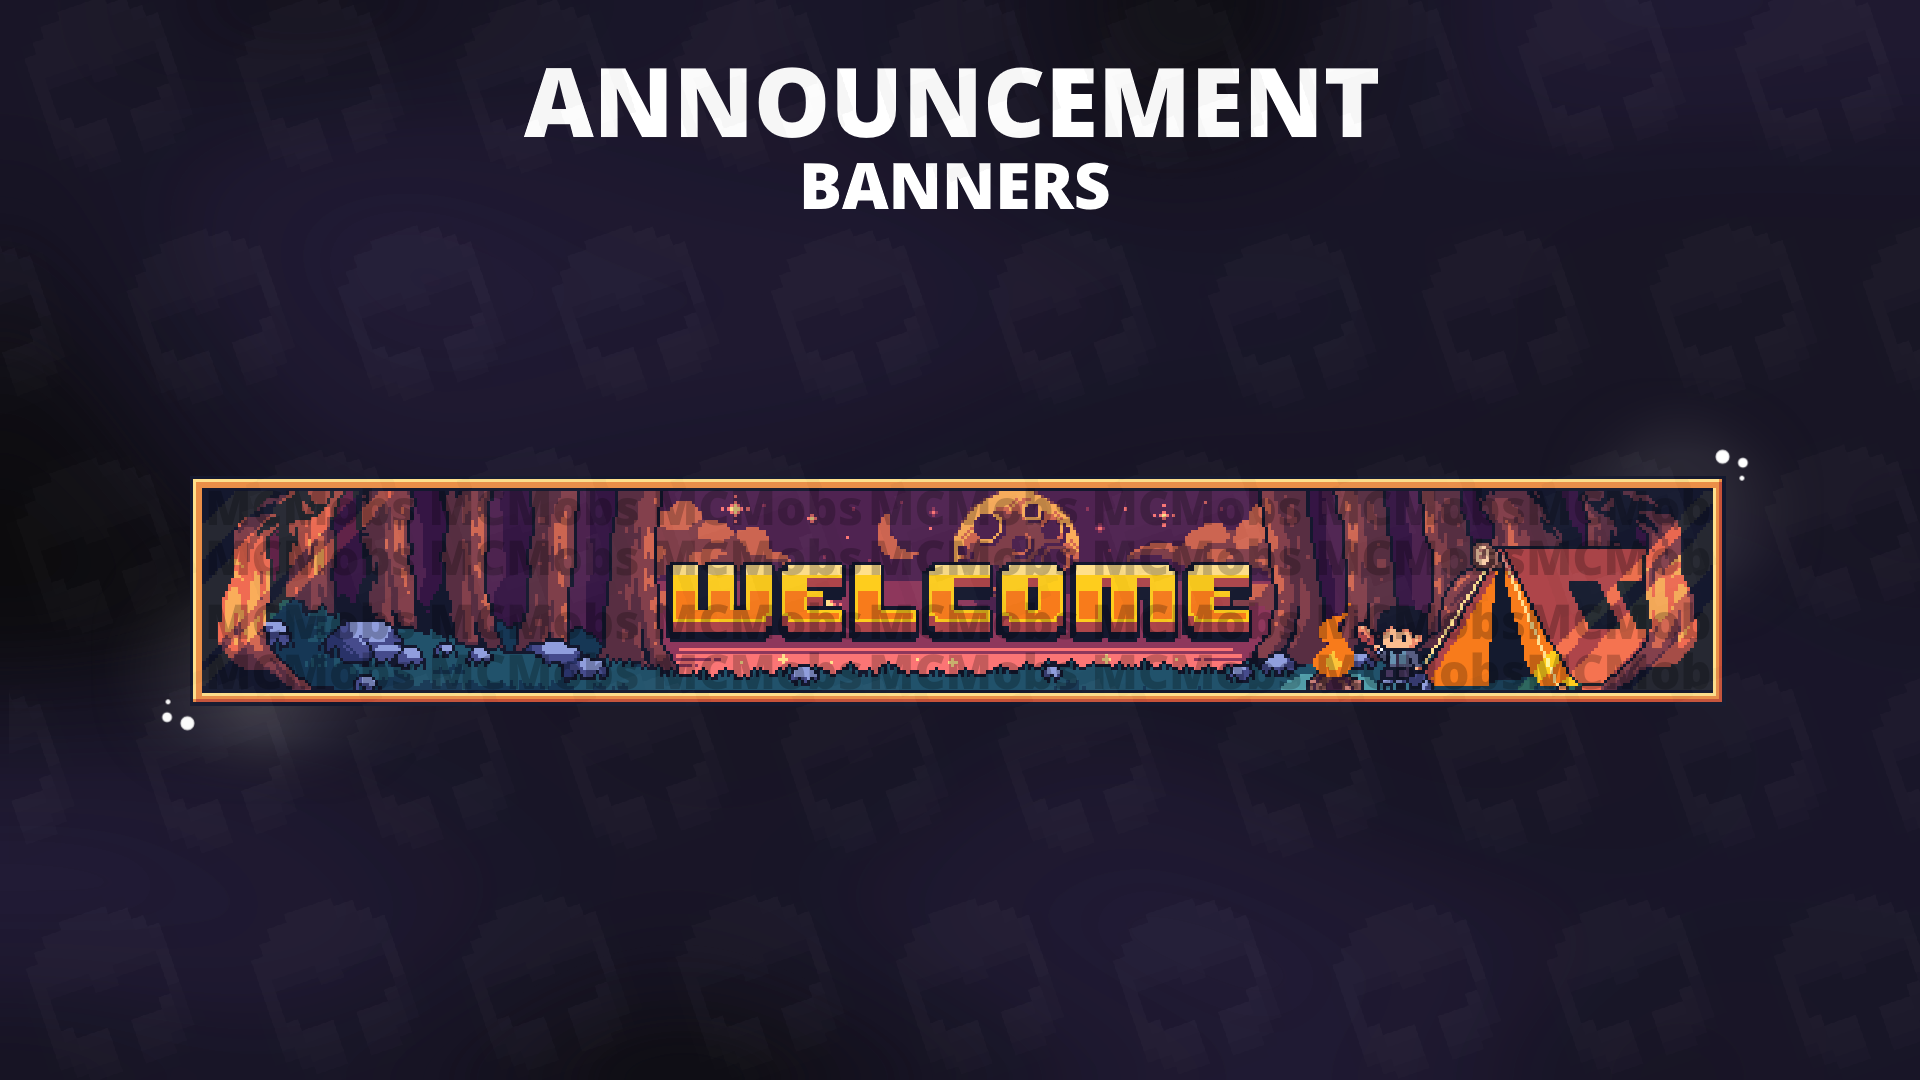 Announcement Banners